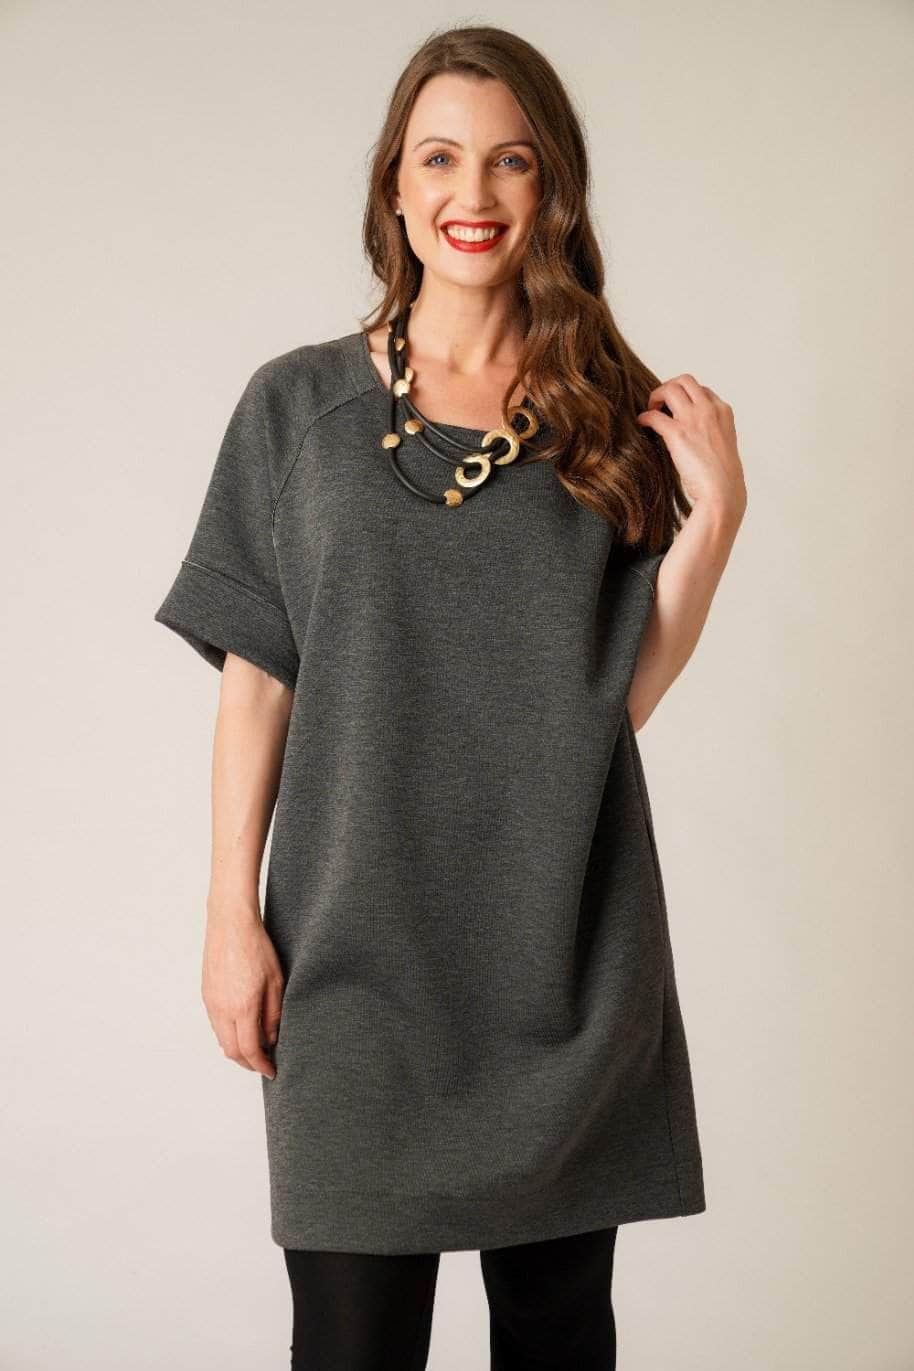 Saloos Dress Grey / 12 Relaxed Casual Tunic Dress with Necklace